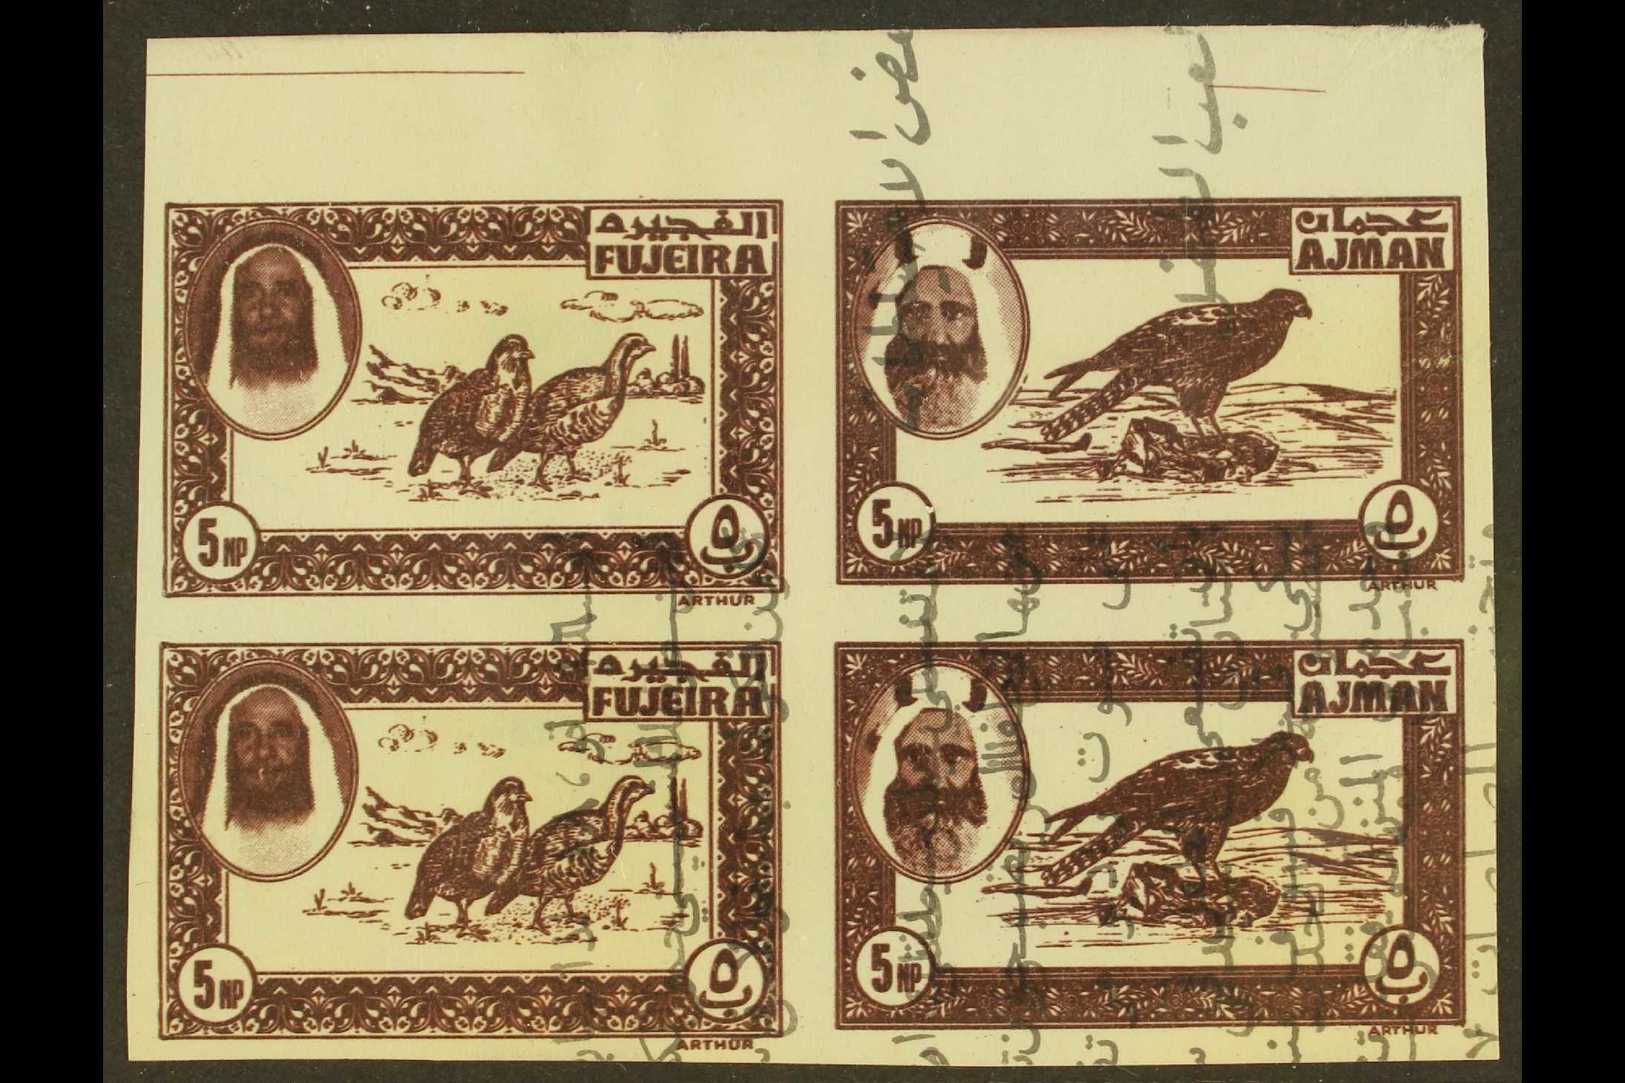 BIRDS 1972 5np PRINTER'S TRIAL Imperforate Block Of 4 In Purple-brown Featuring Game Birds & Raptors, Issue For Ajman /  - Non Classés